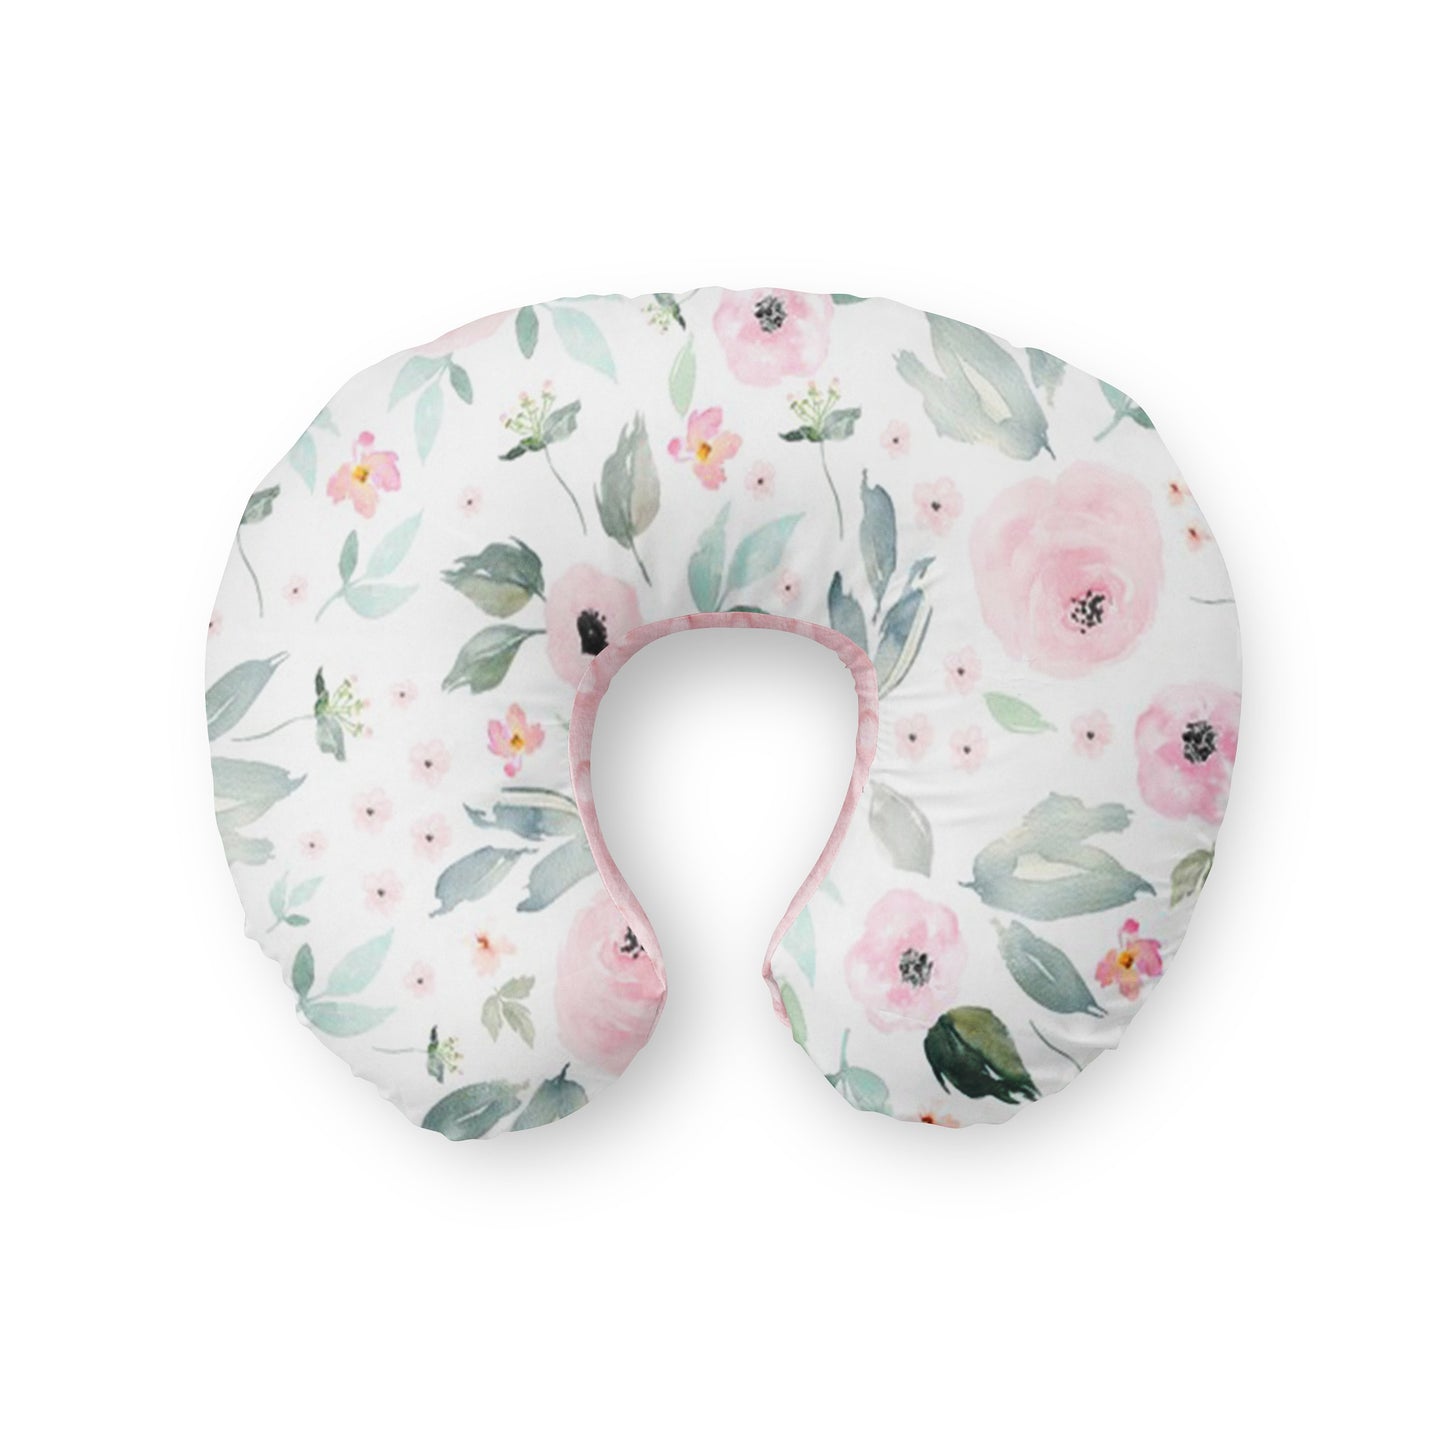 Nursing Pillow Cover. Blush Bloom floral water color pink minky